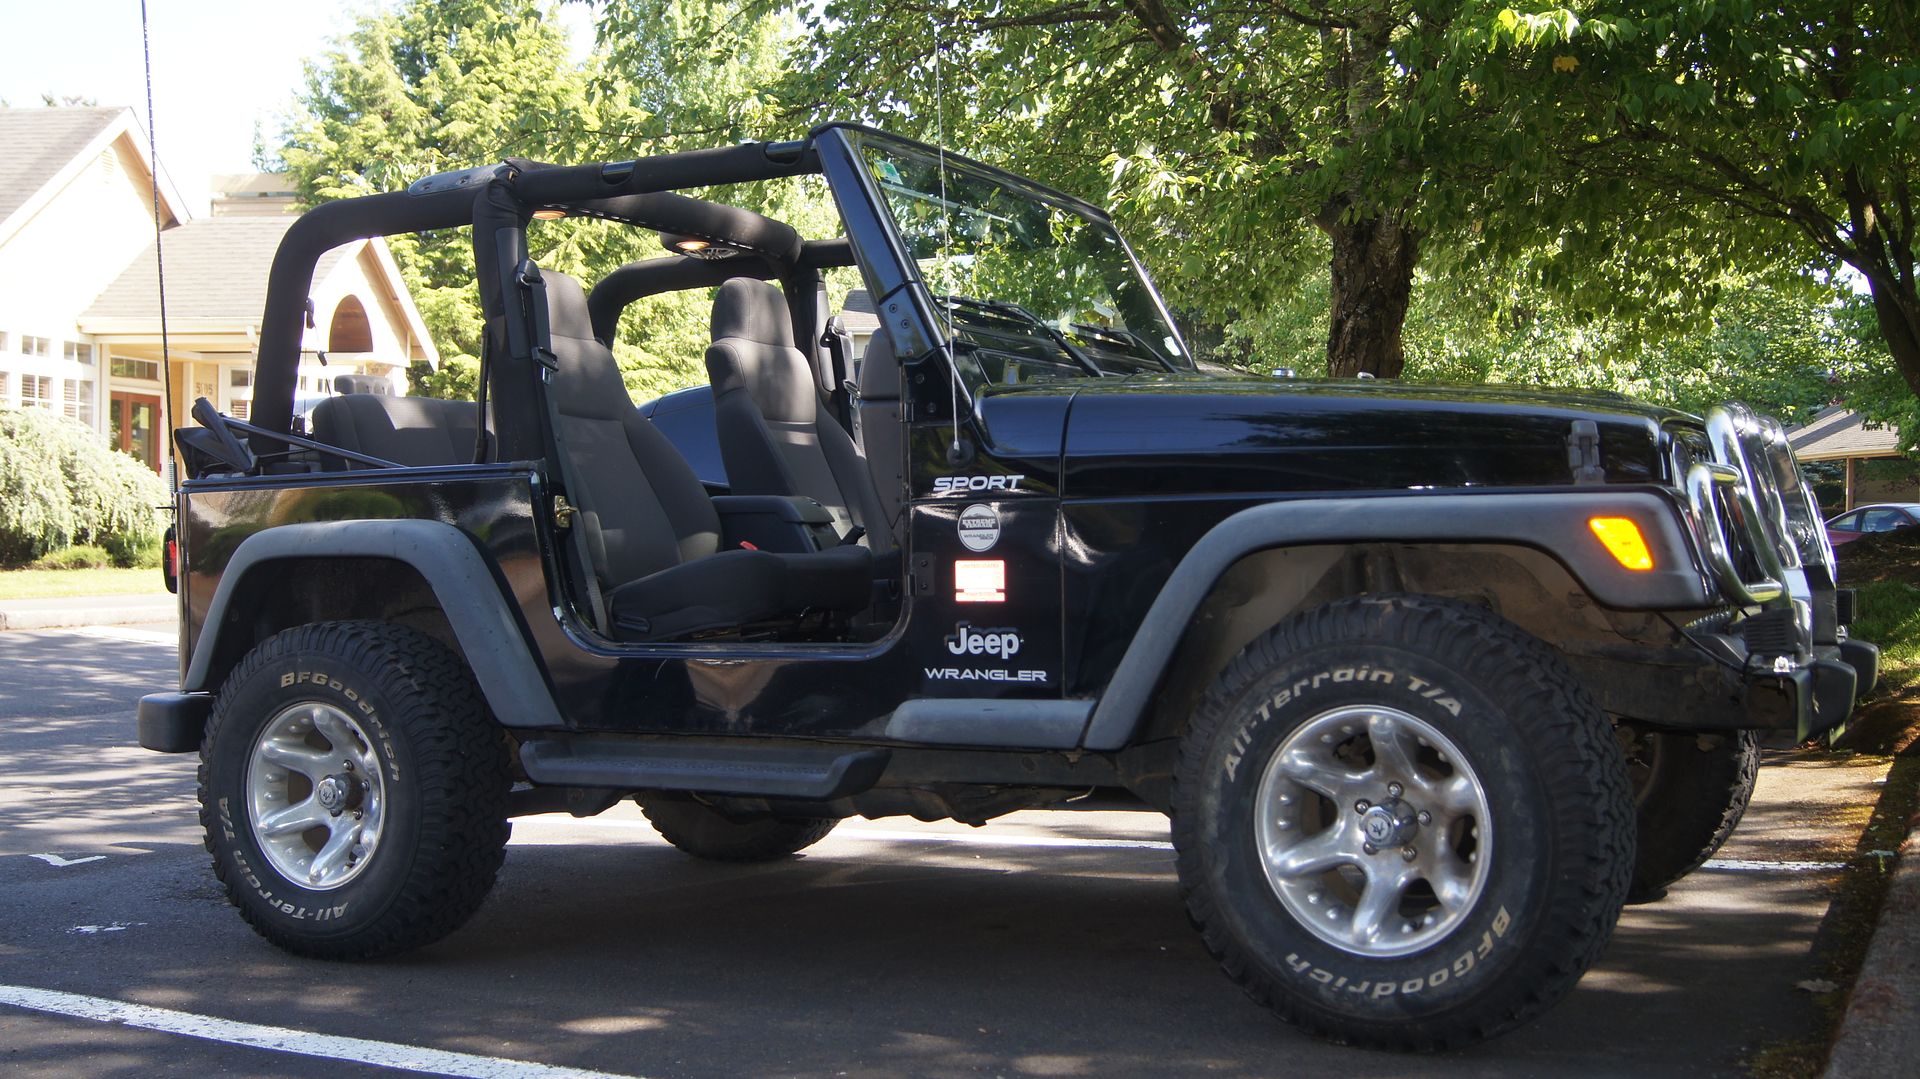 Naked JL Pics - Topless and Doorless (Jeeps only please 